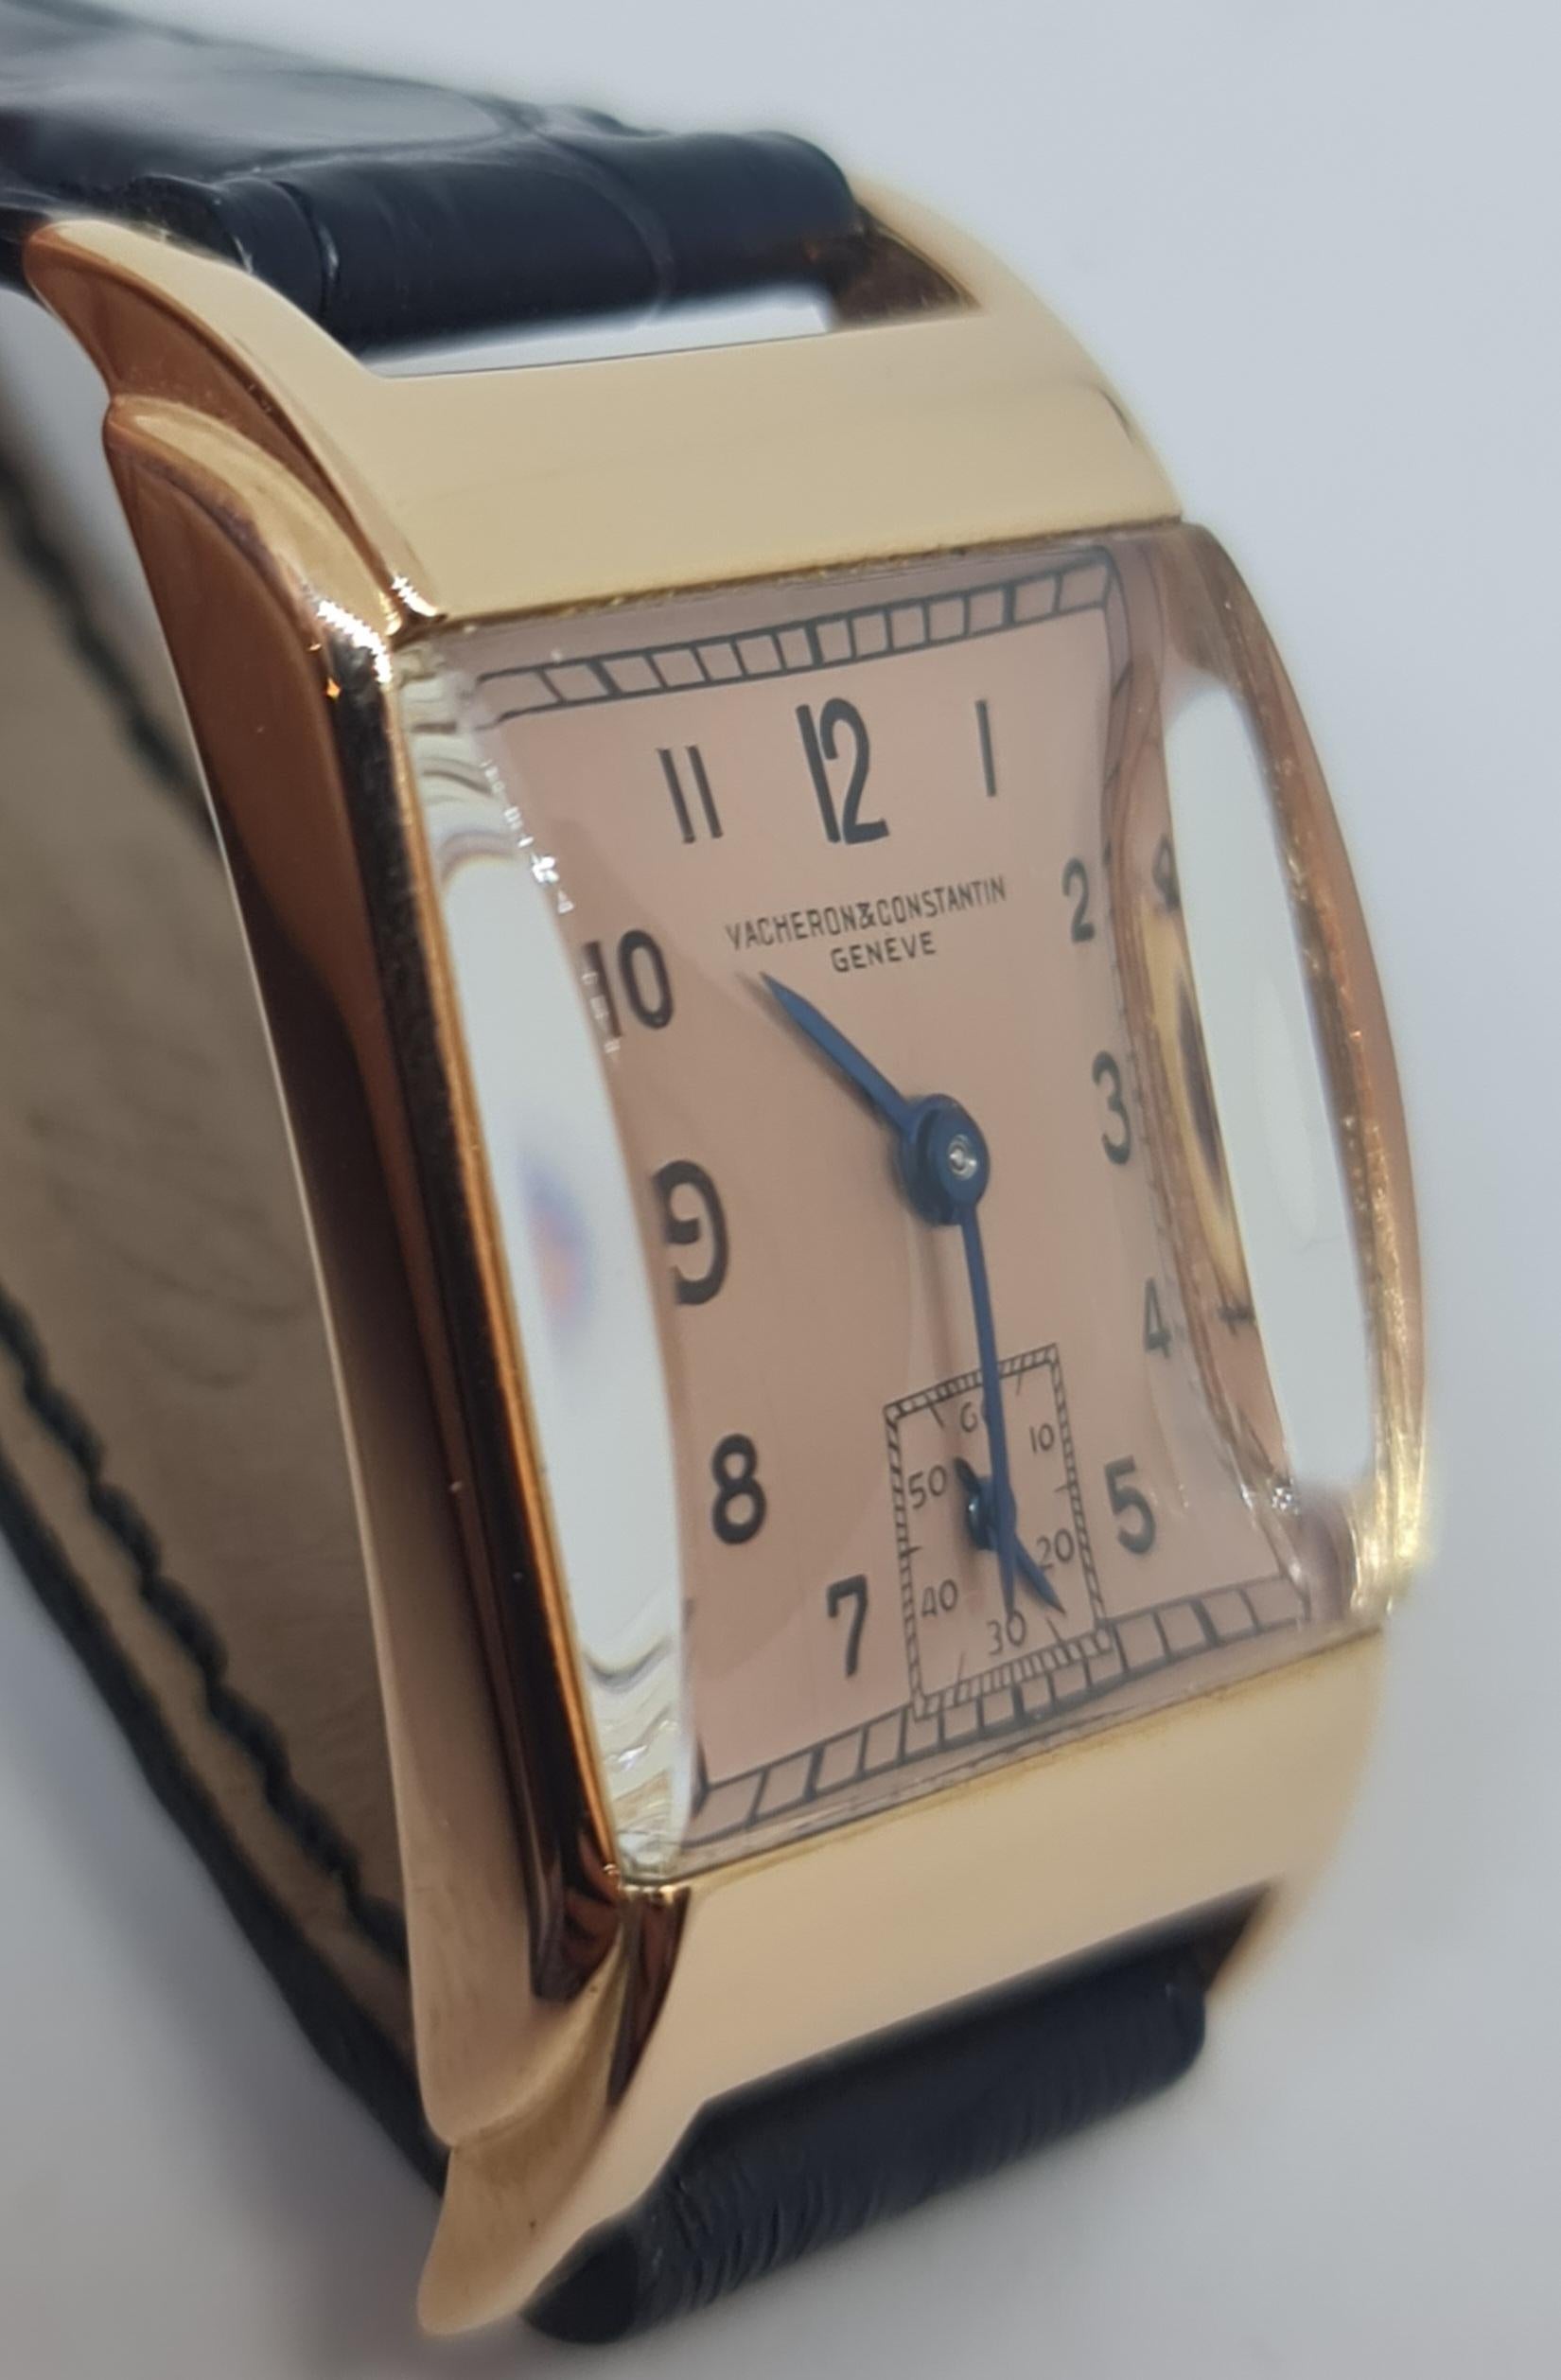 18kt Pink Gold Vacheron Constantin Manual Winding, Excellent Condition from 1935 For Sale 1